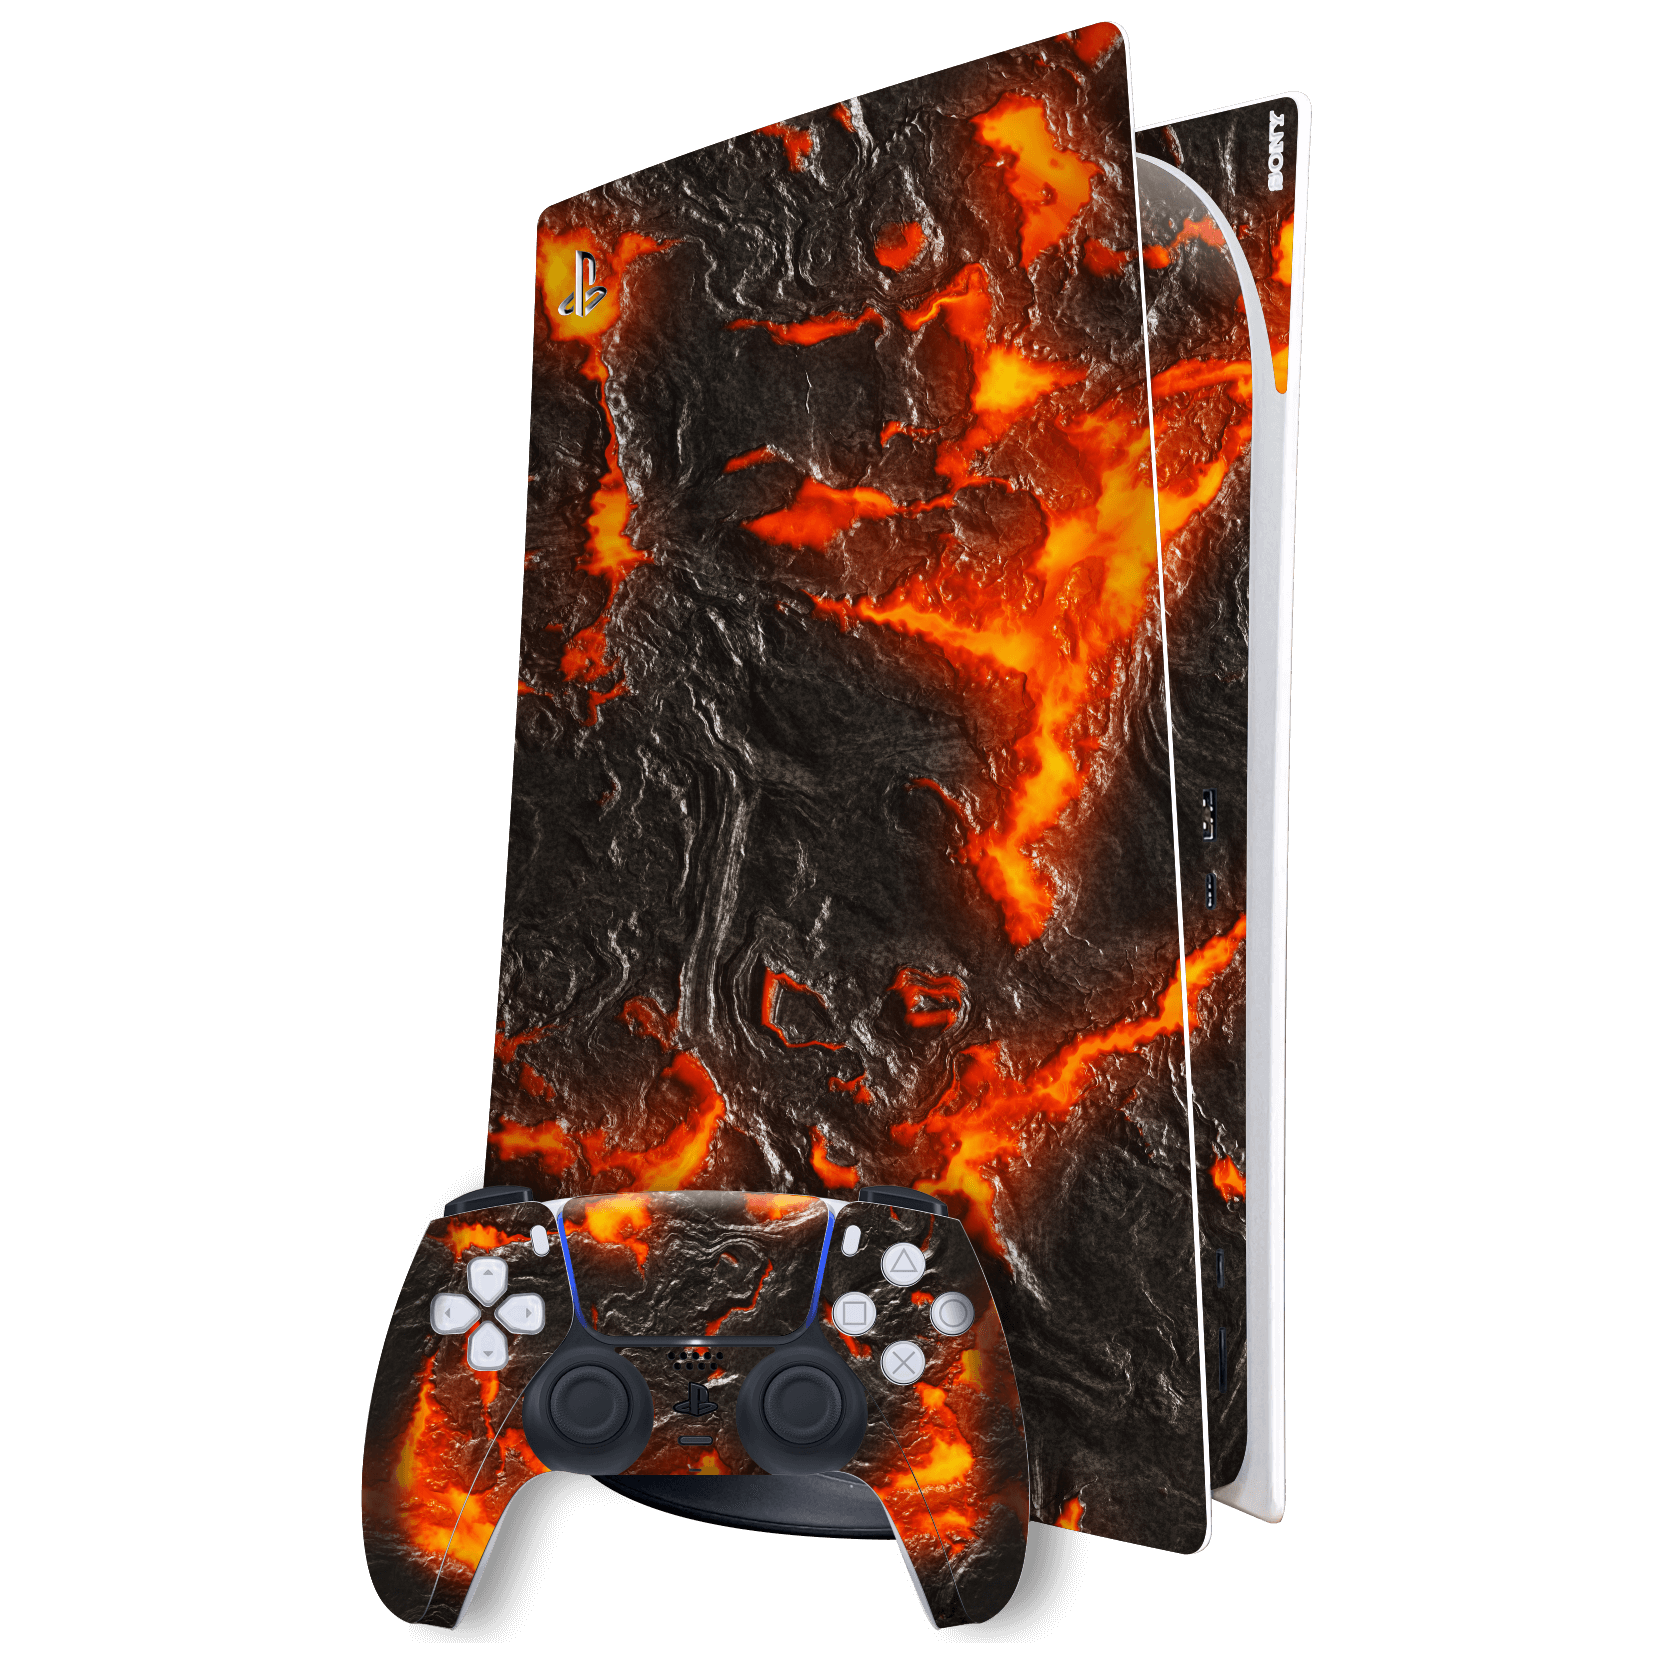 Playstation 5 (PS5) DIGITAL EDITION SIGNATURE MAGMA Skin, Wrap, Decal, Protector, Cover by EasySkinz | EasySkinz.com